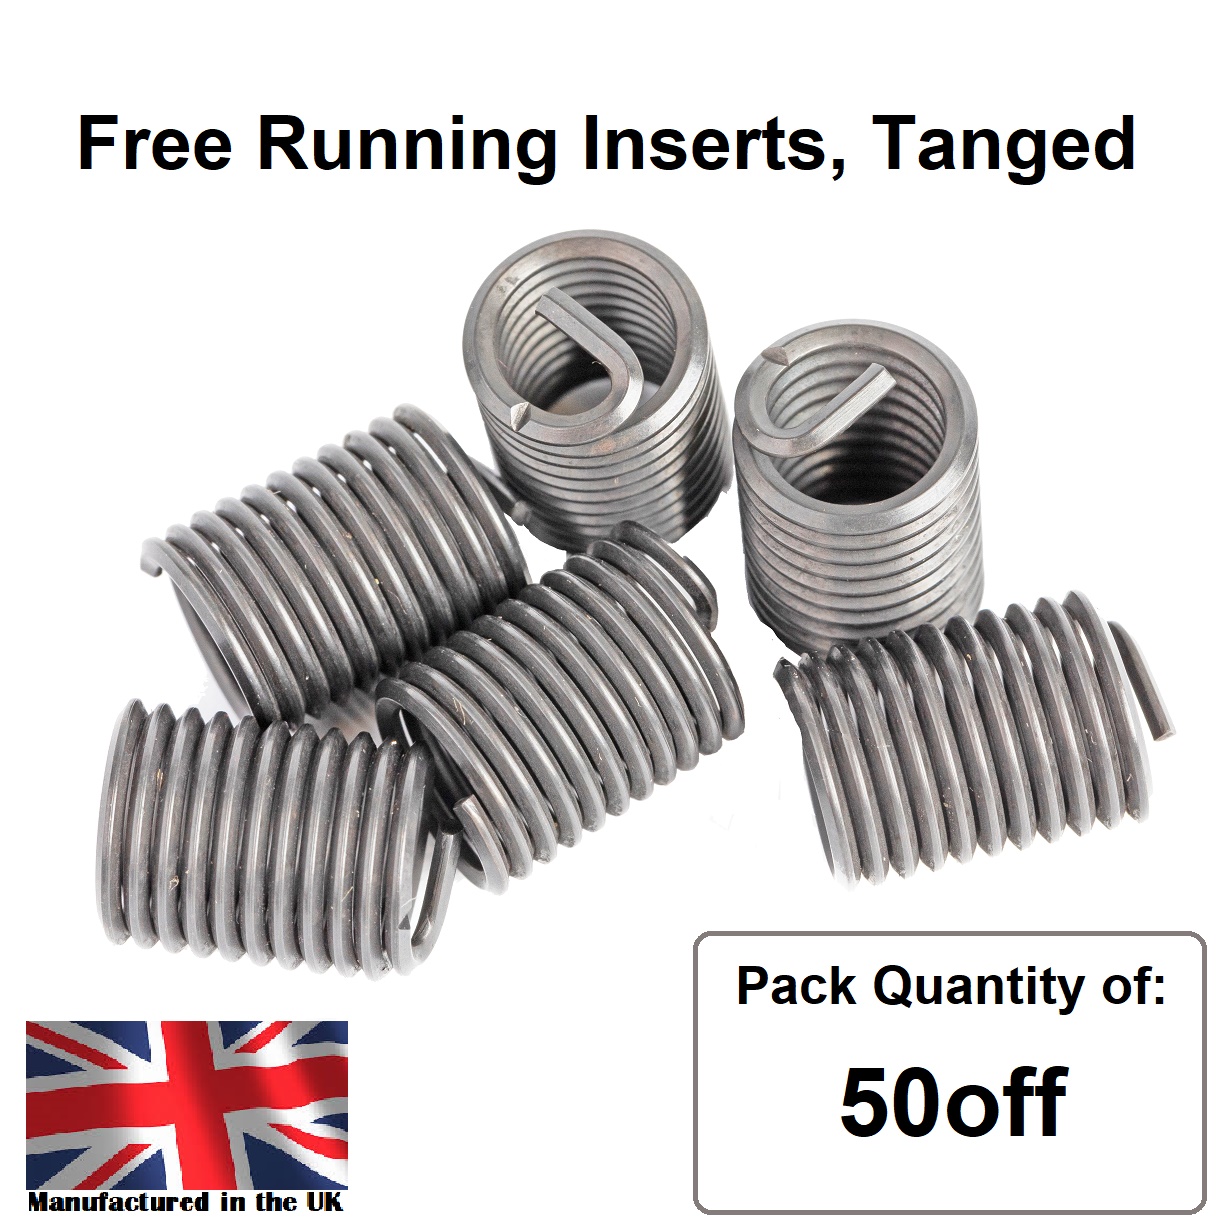 M4 x 0.7 x 1.5D Metric Coarse, Free Running, Tanged, Wire Thread Repair Insert, 304/A2 Stainless (Pack 50)